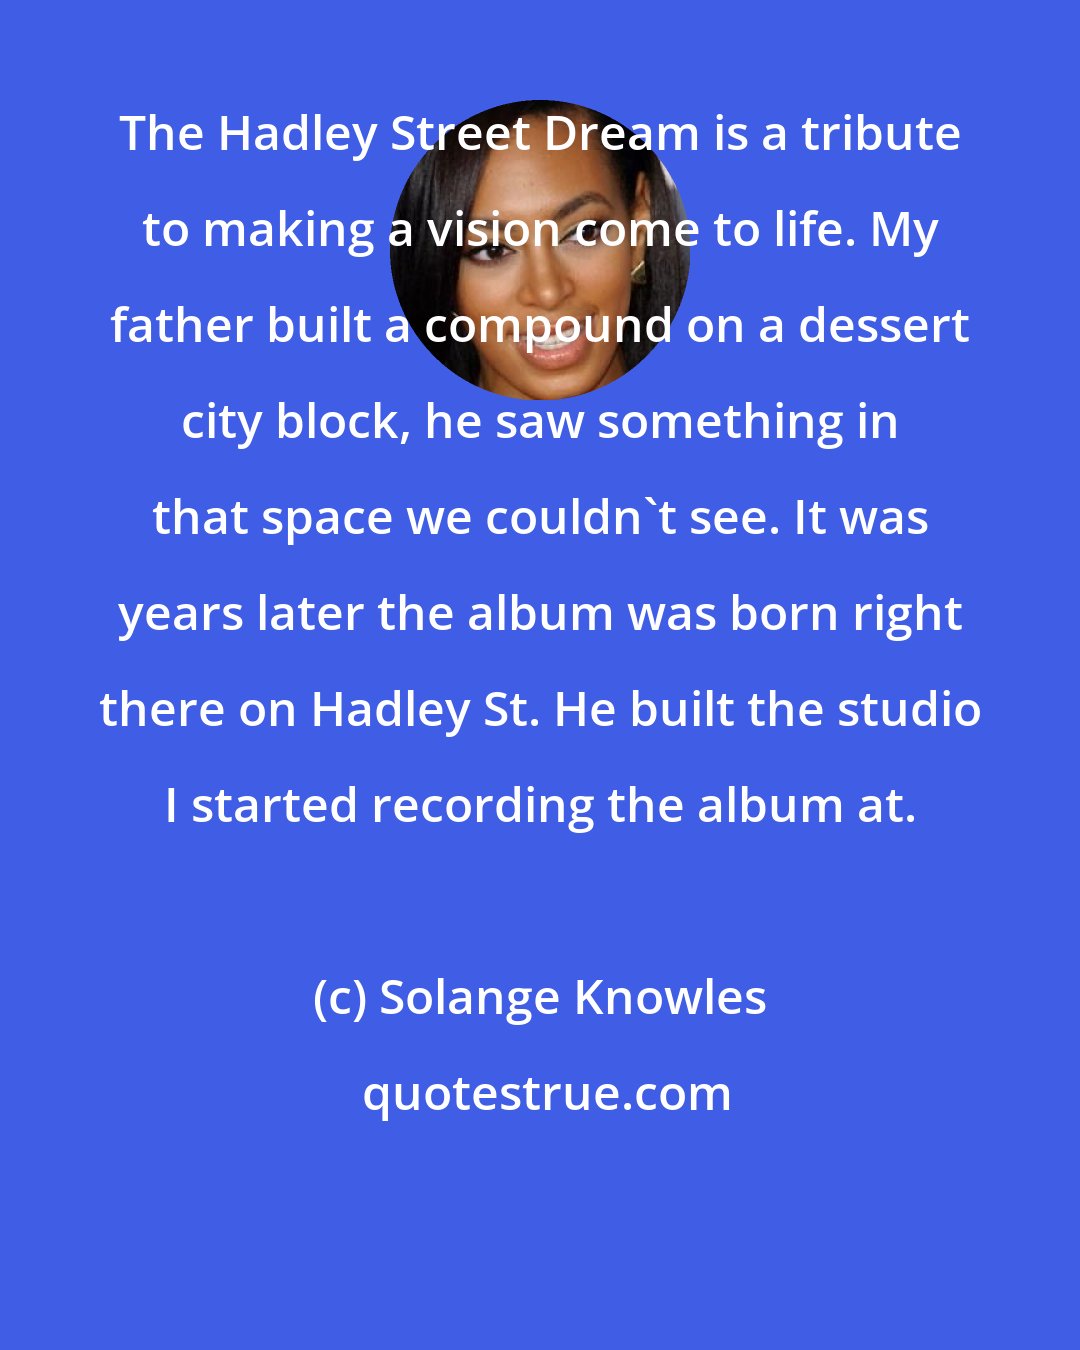 Solange Knowles: The Hadley Street Dream is a tribute to making a vision come to life. My father built a compound on a dessert city block, he saw something in that space we couldn't see. It was years later the album was born right there on Hadley St. He built the studio I started recording the album at.